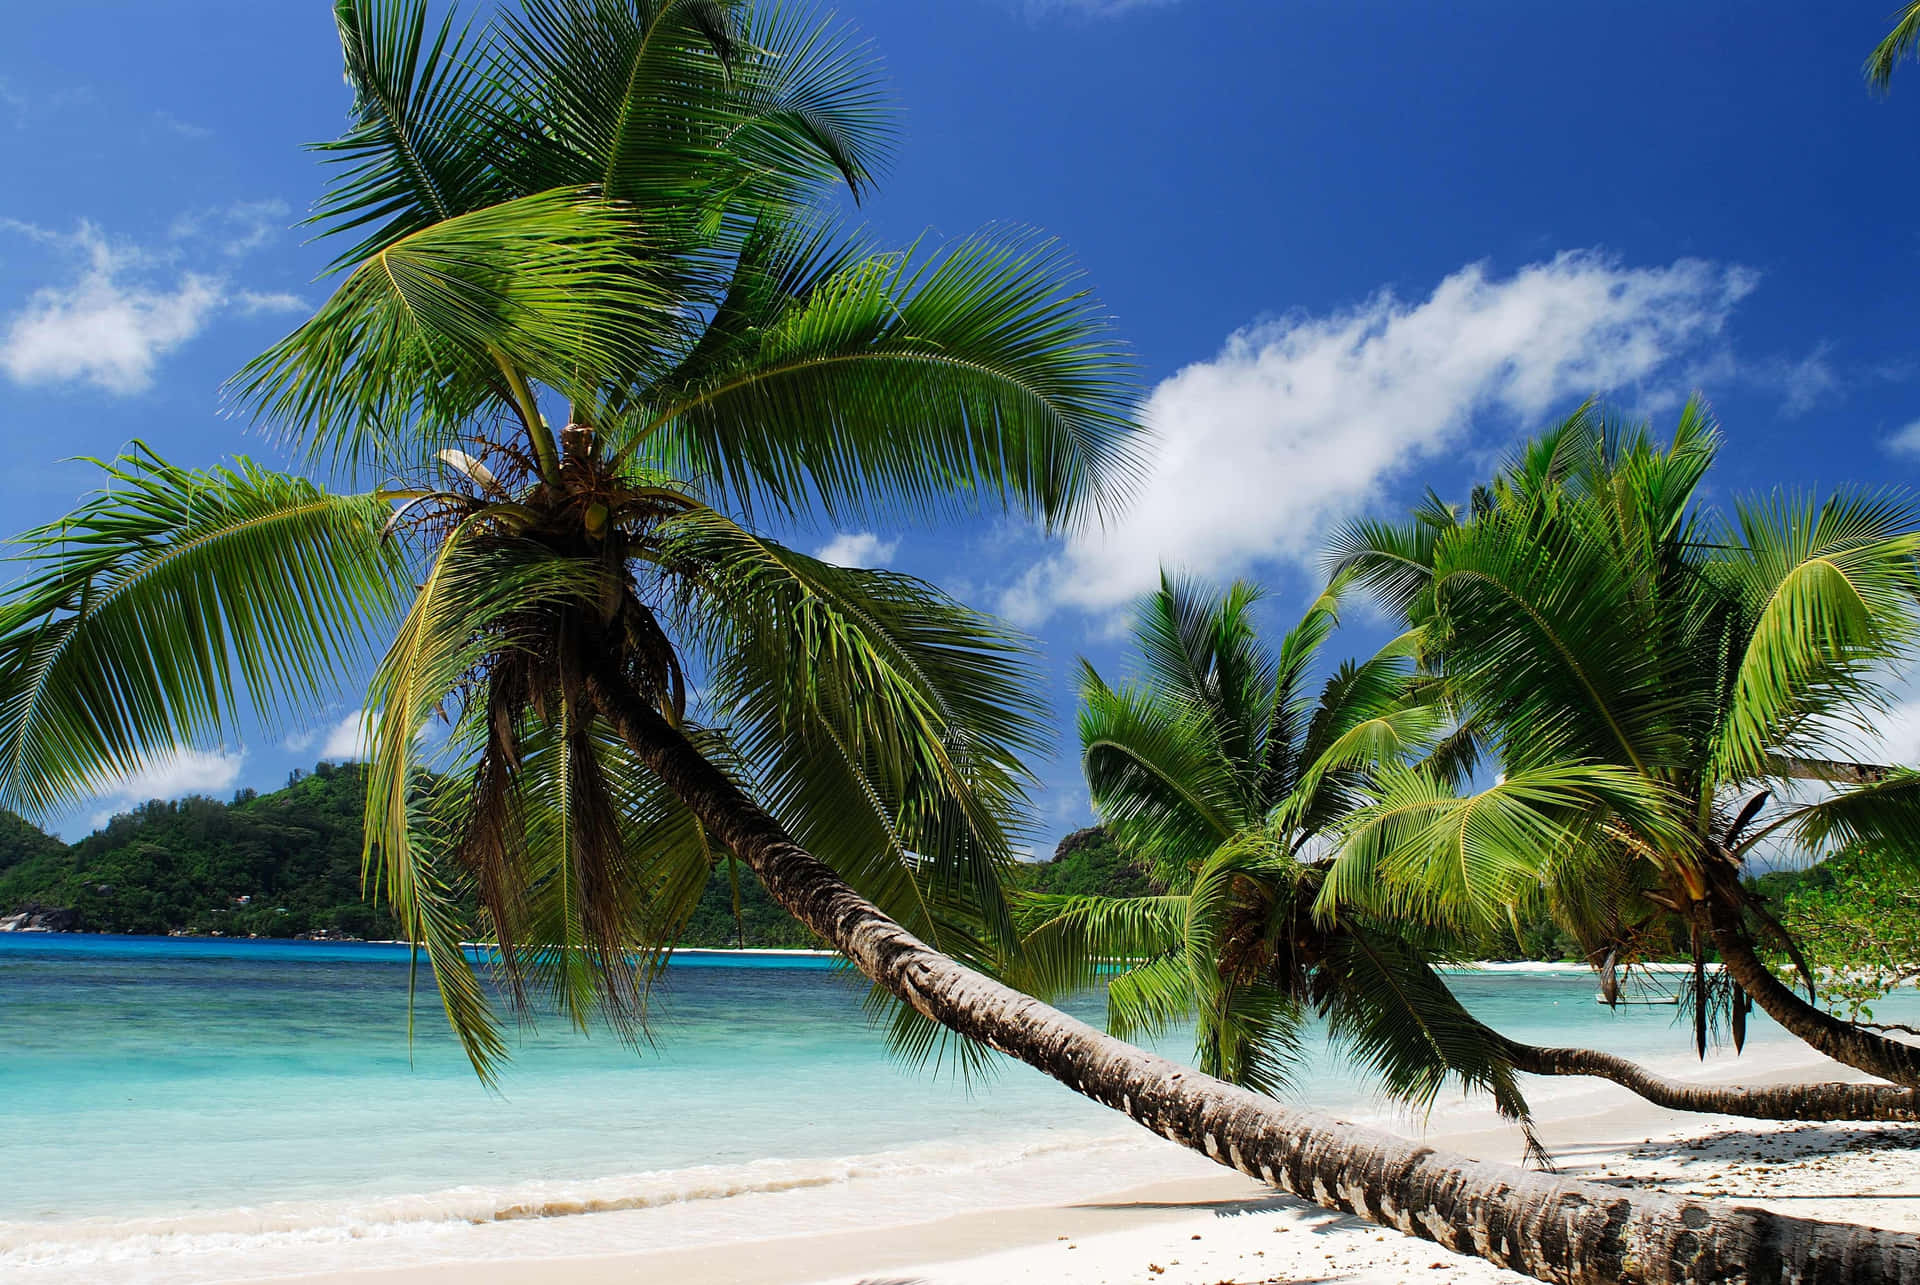 720p Beach Leaning Coconut Background